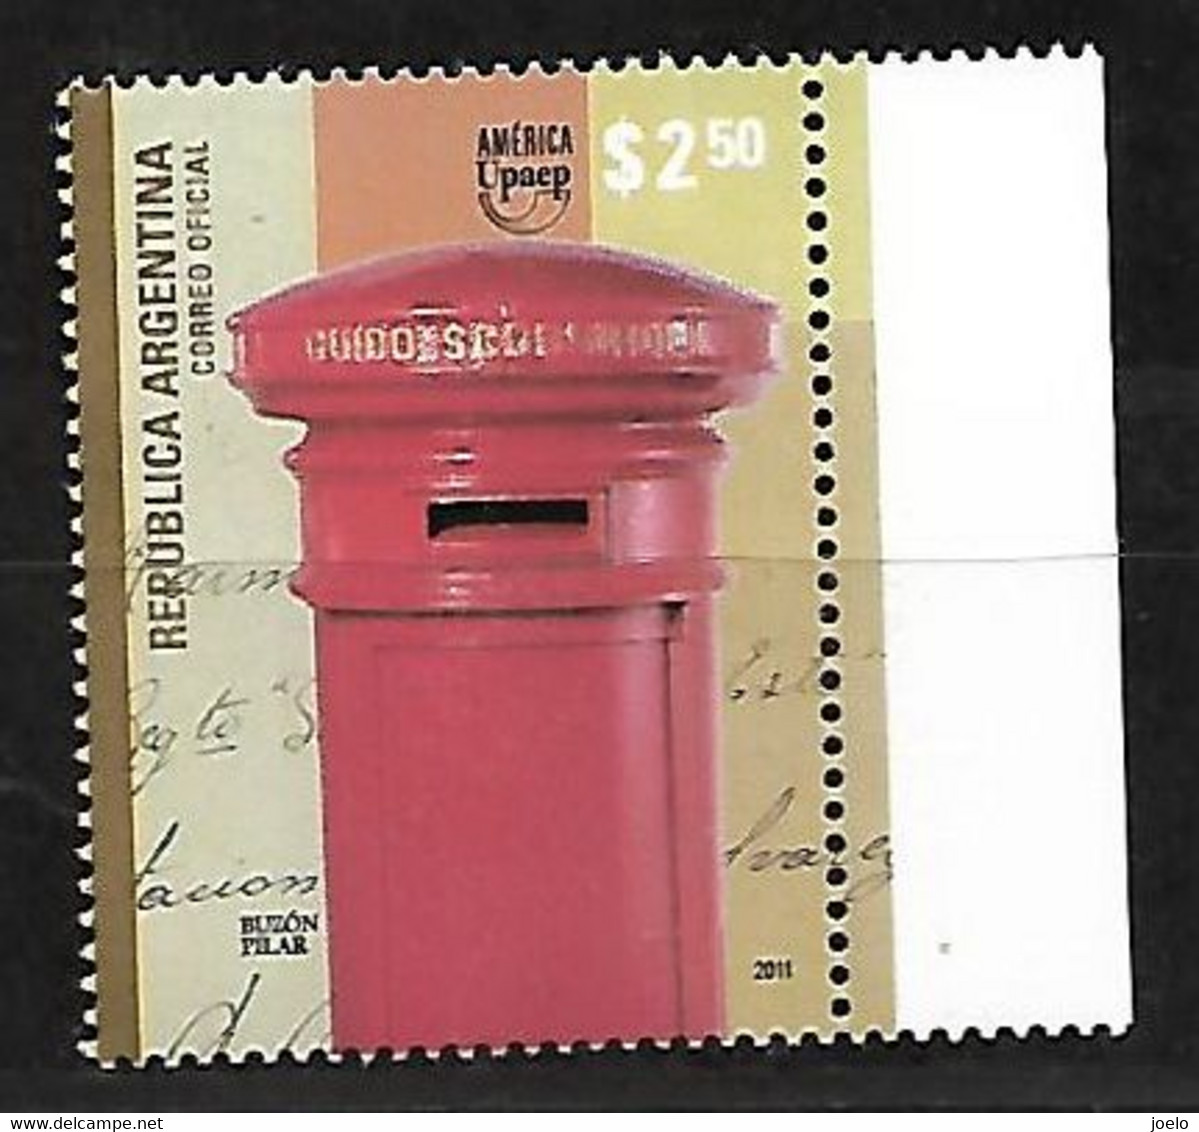 ARGENTINA 2011 LETTER BOXES MNH PAIR - Unused Stamps